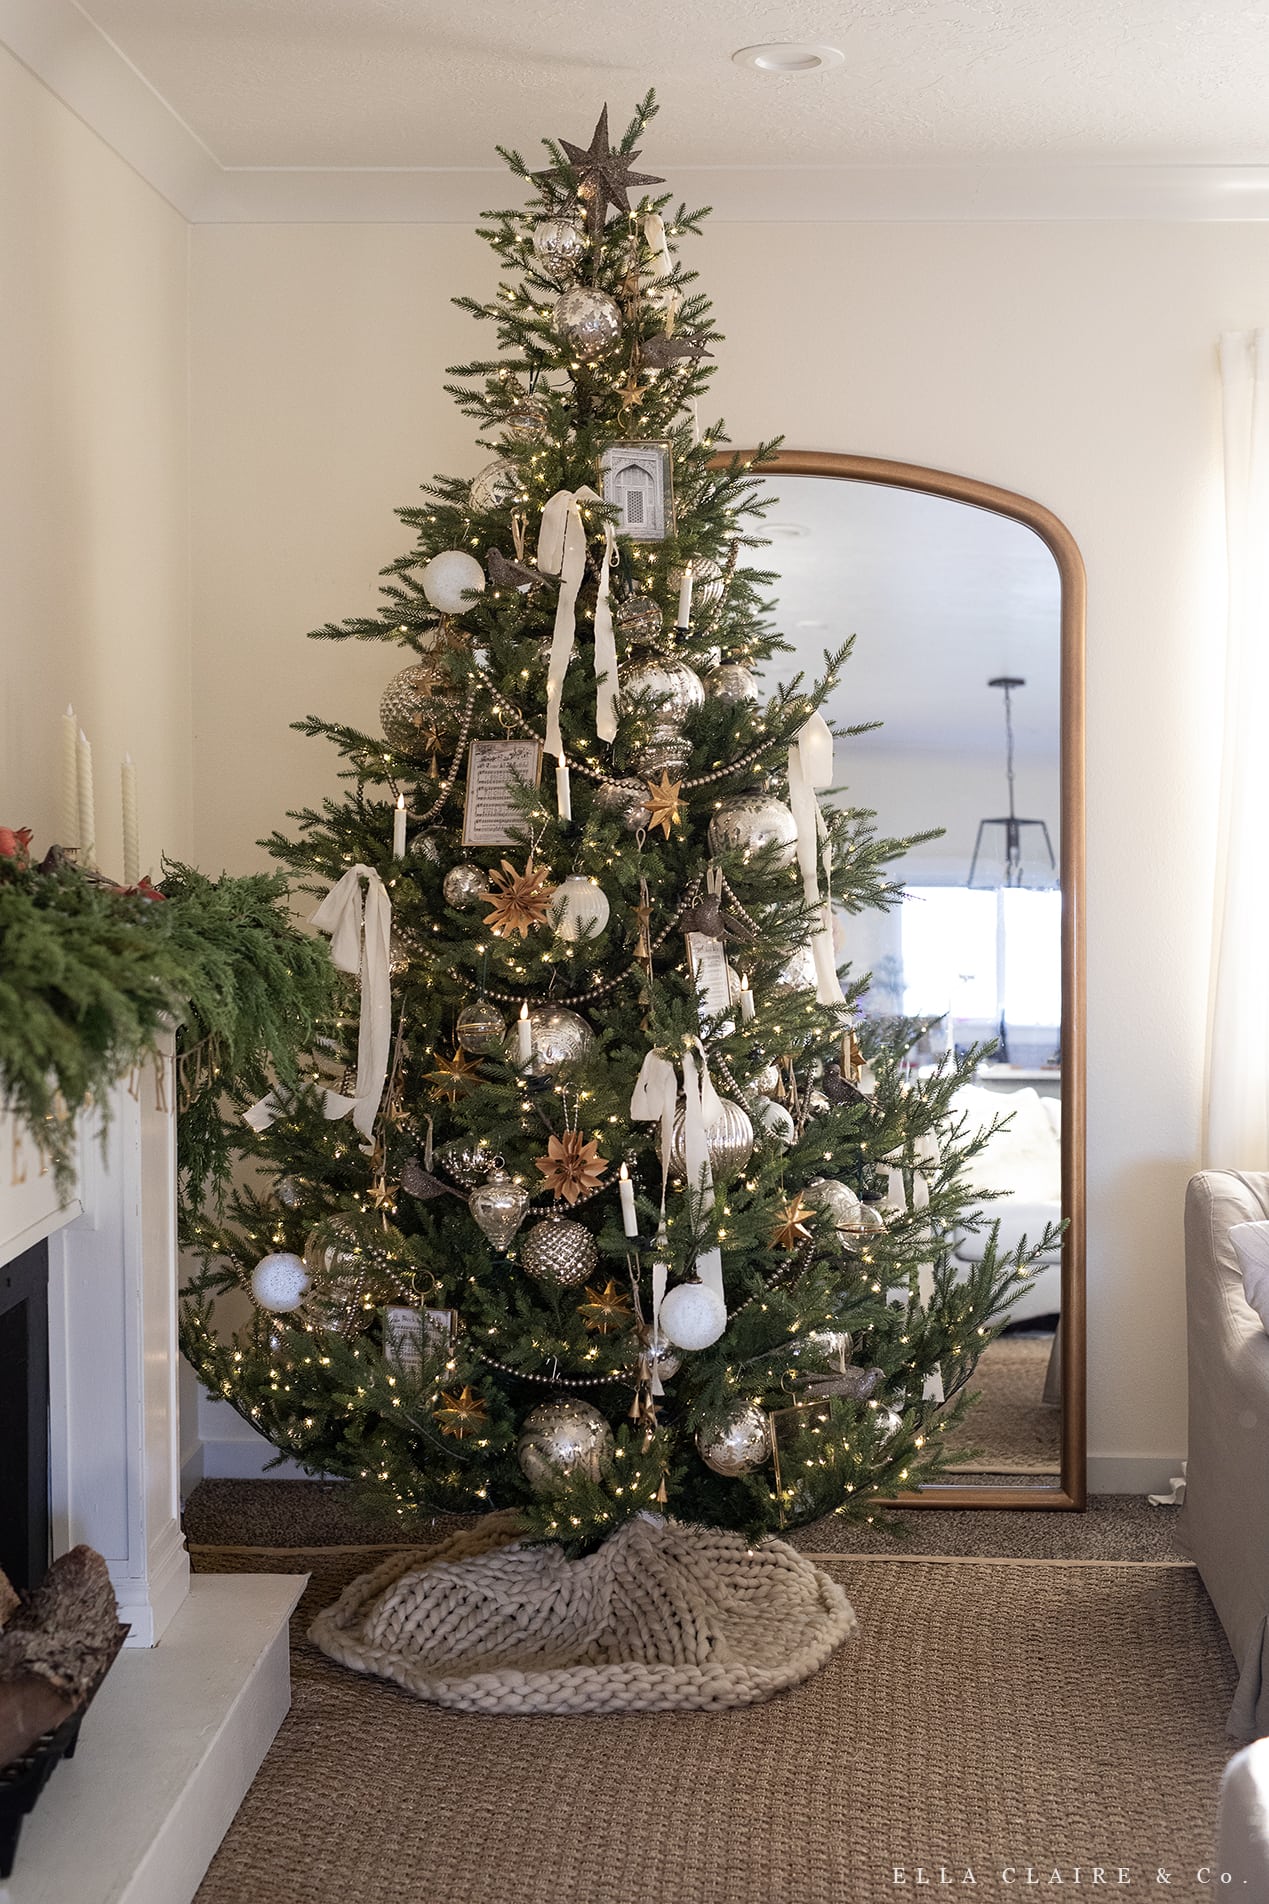 Vintage Christmas tree with paper ornaments